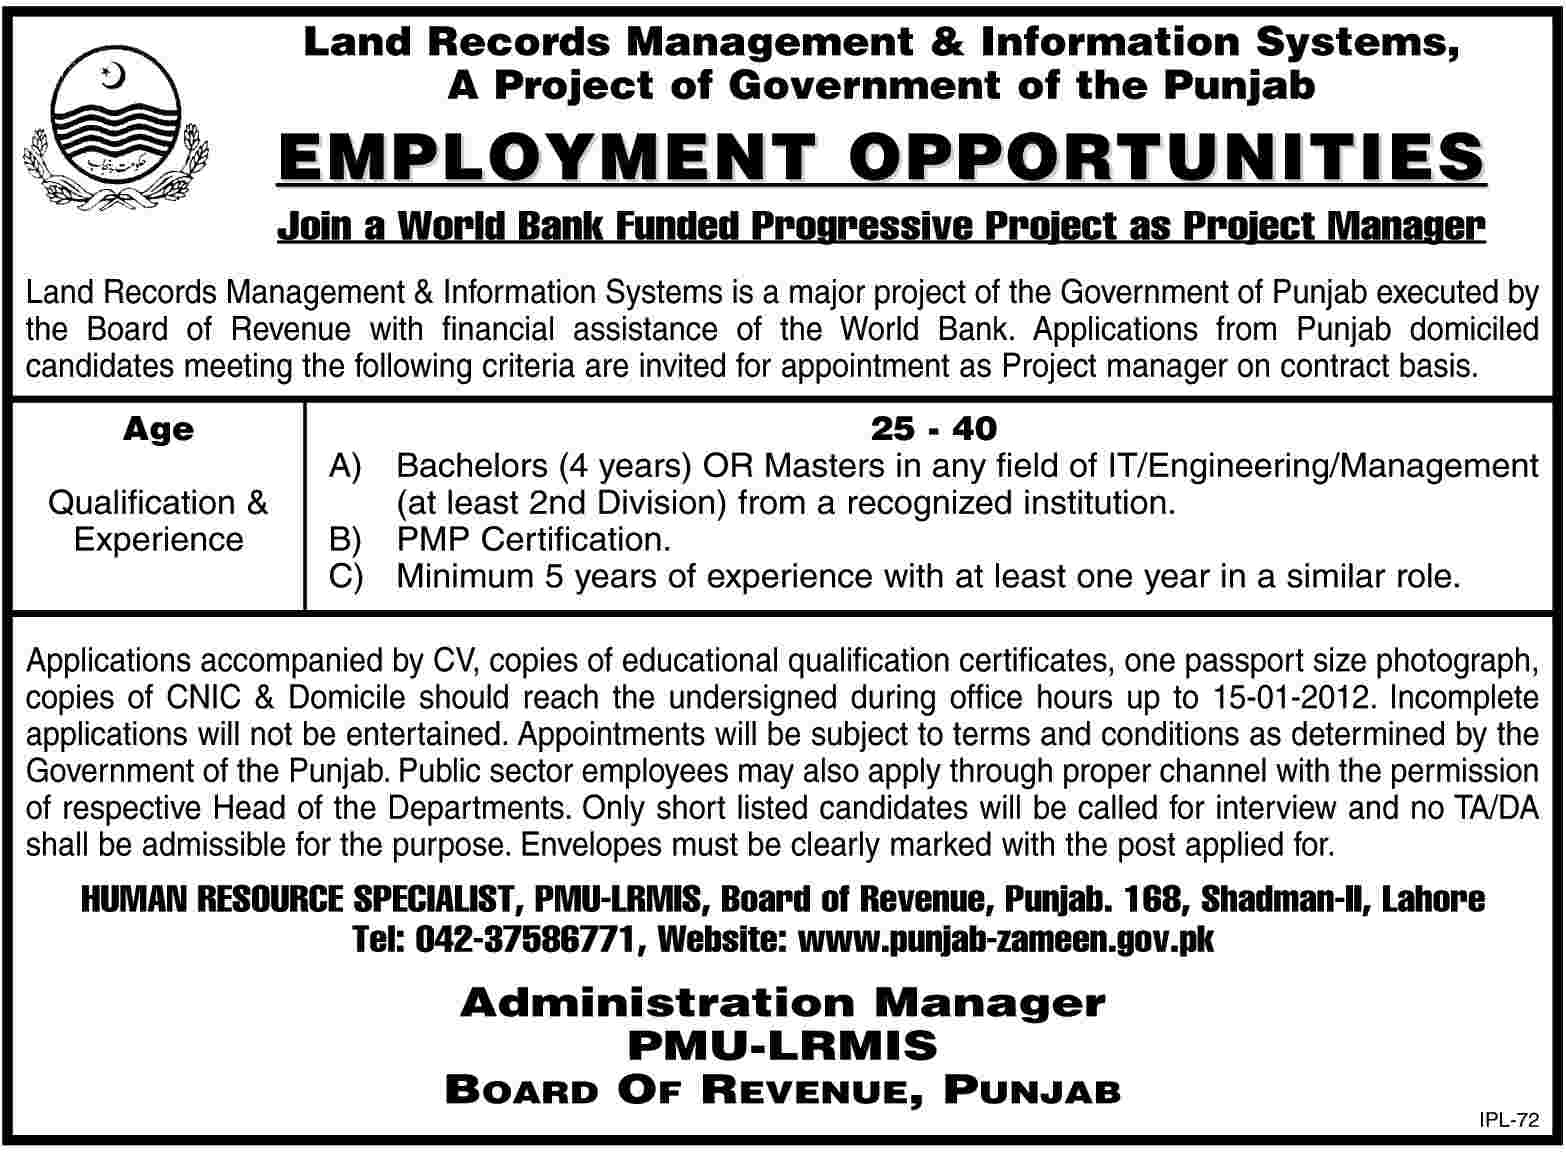 Land Records Management & Information Systems Required Project Manager